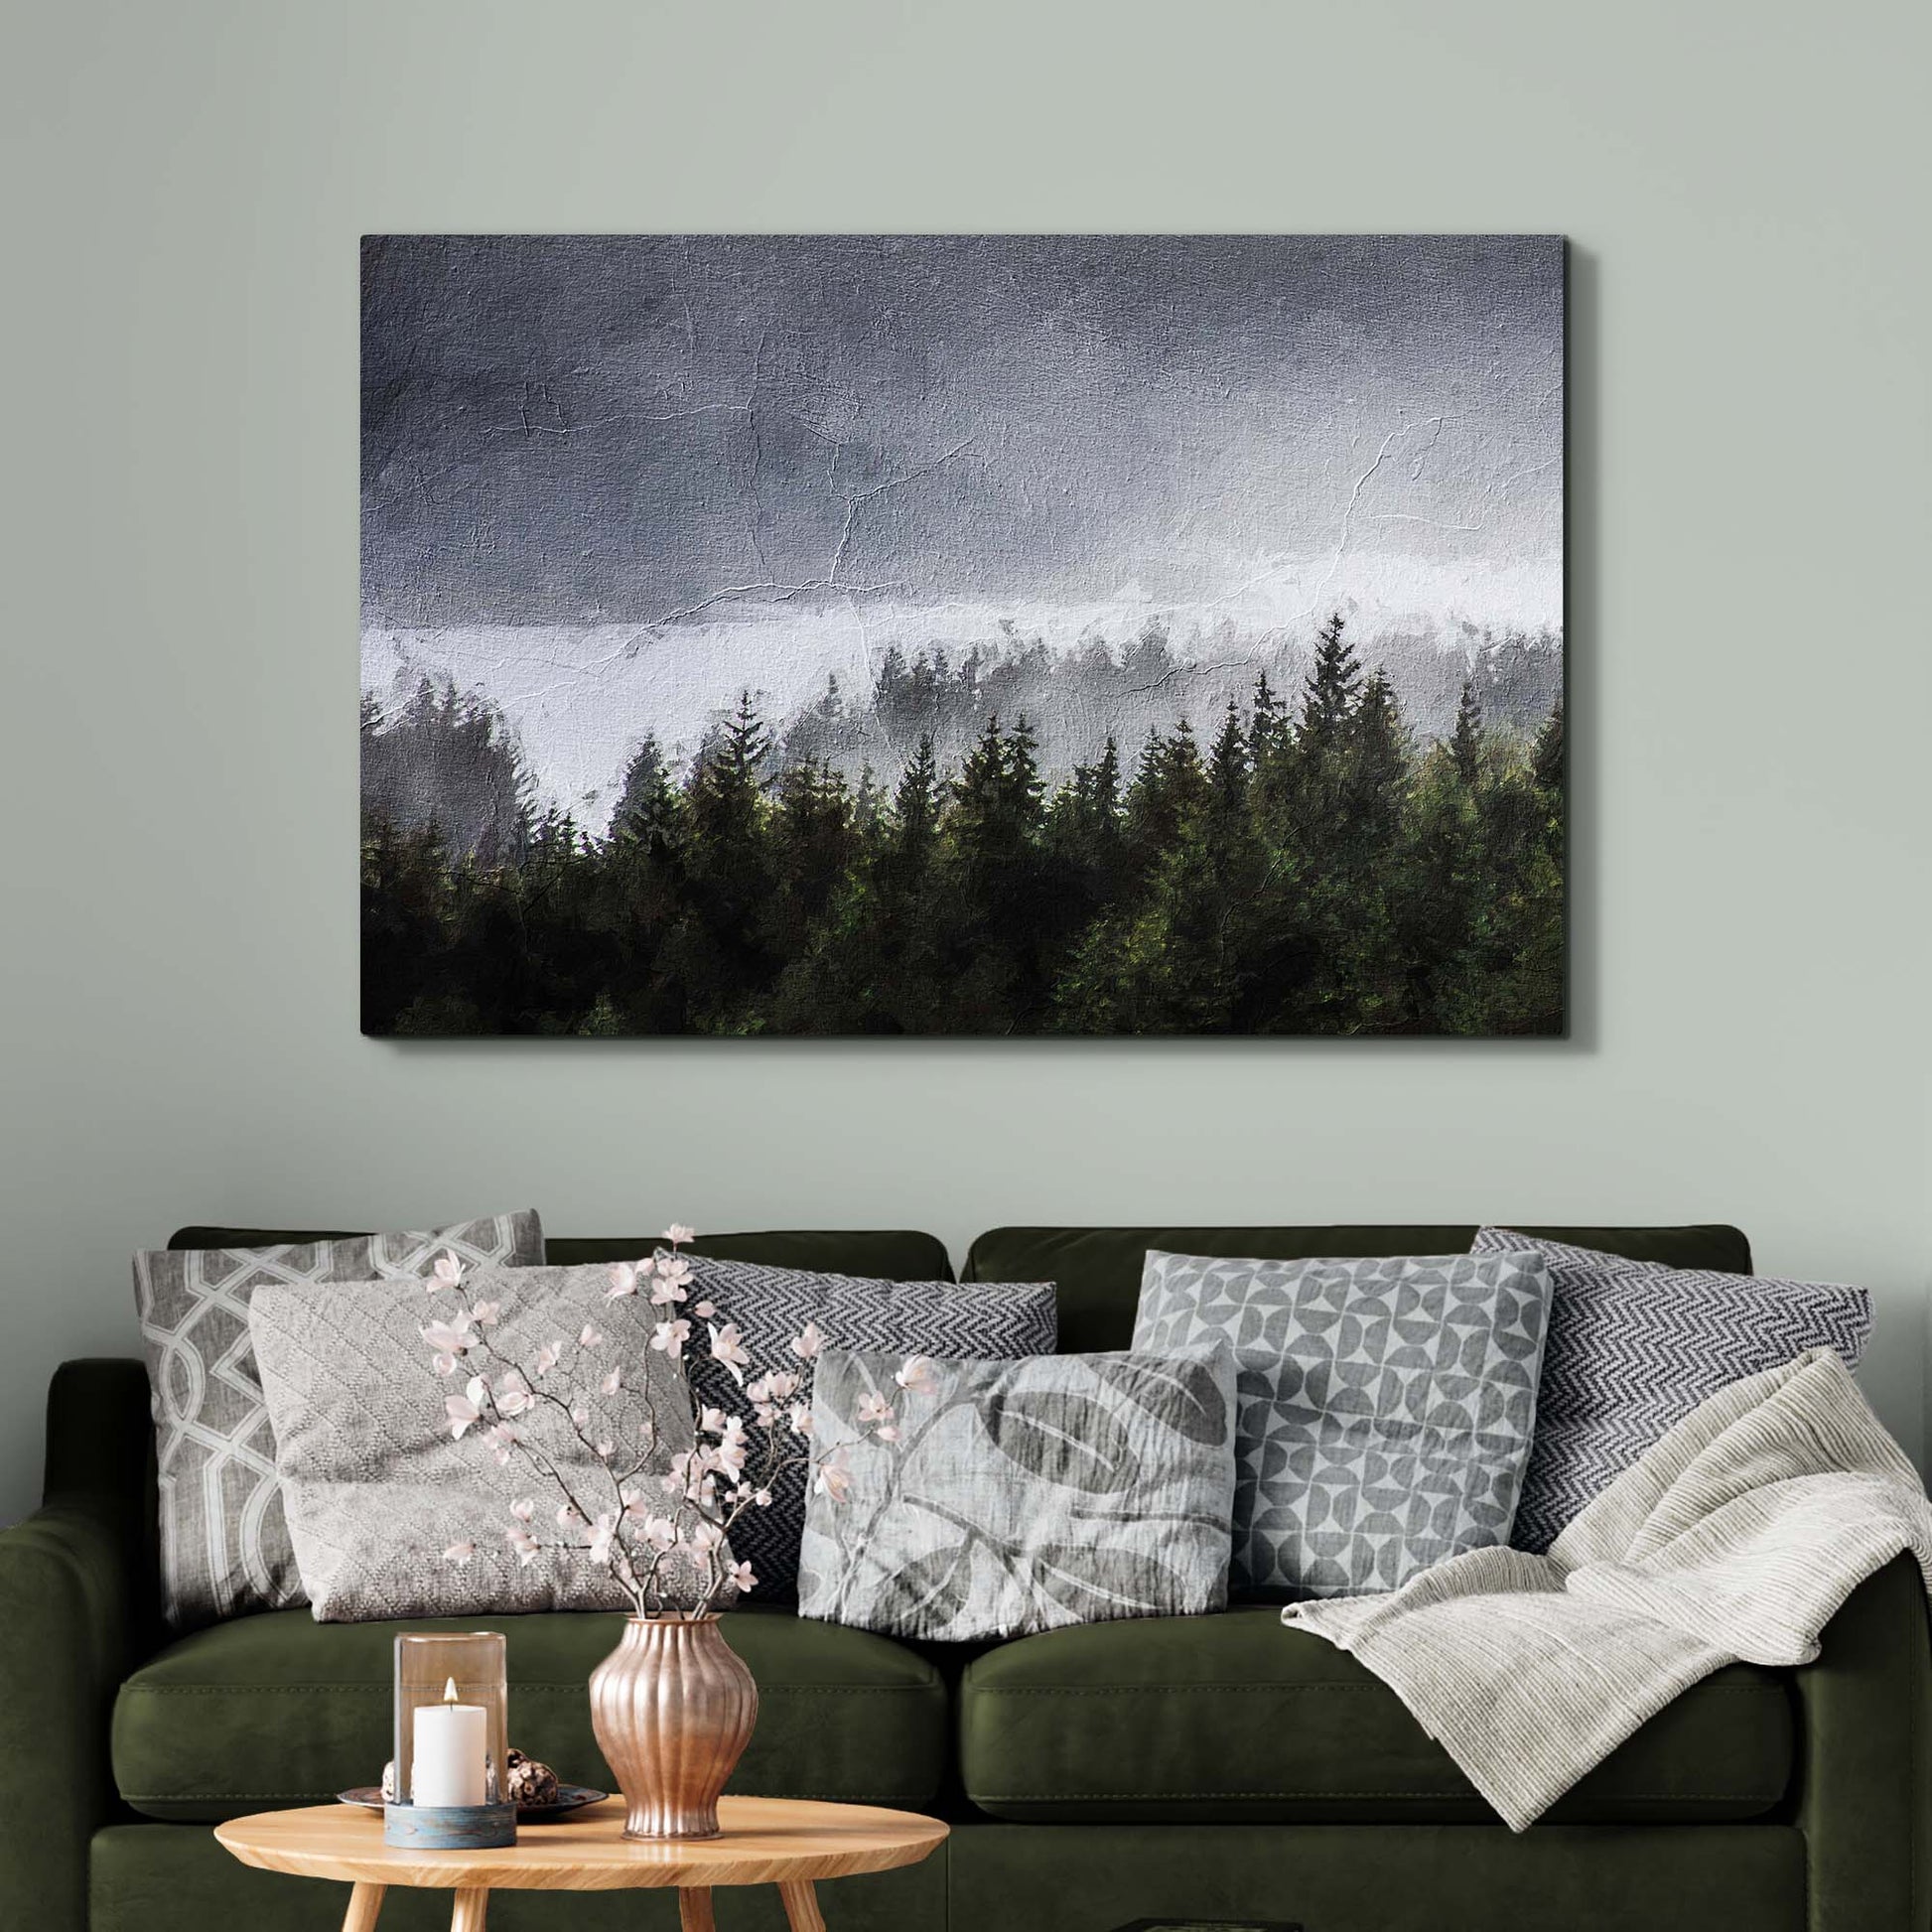 Into The Mist Among The Forest Canvas Wall Art Style 2 - Image by Tailored Canvases